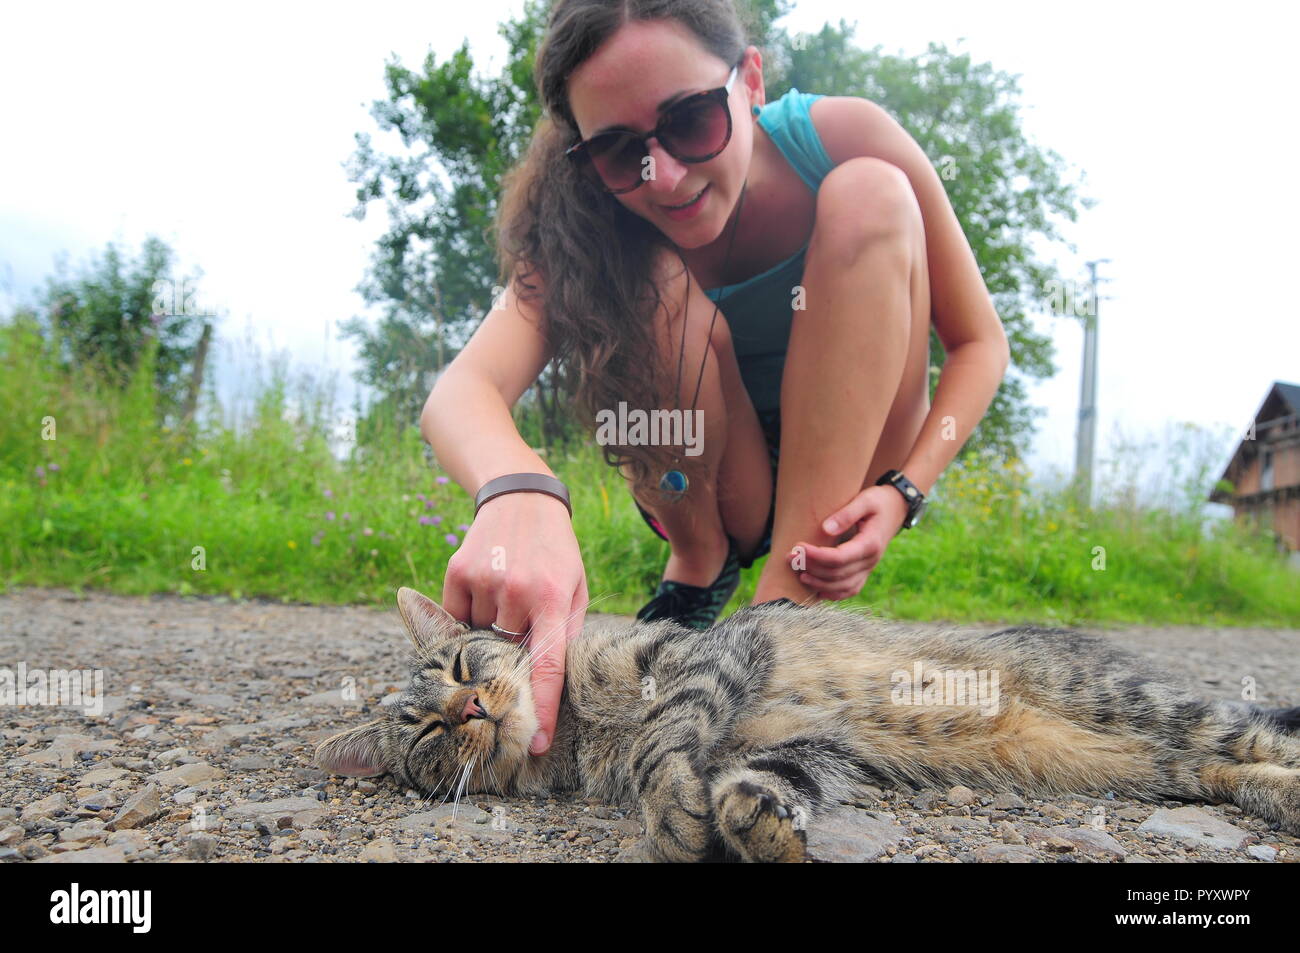 Young woman in sunglasses petting grey striped cat on road. Stock Photo